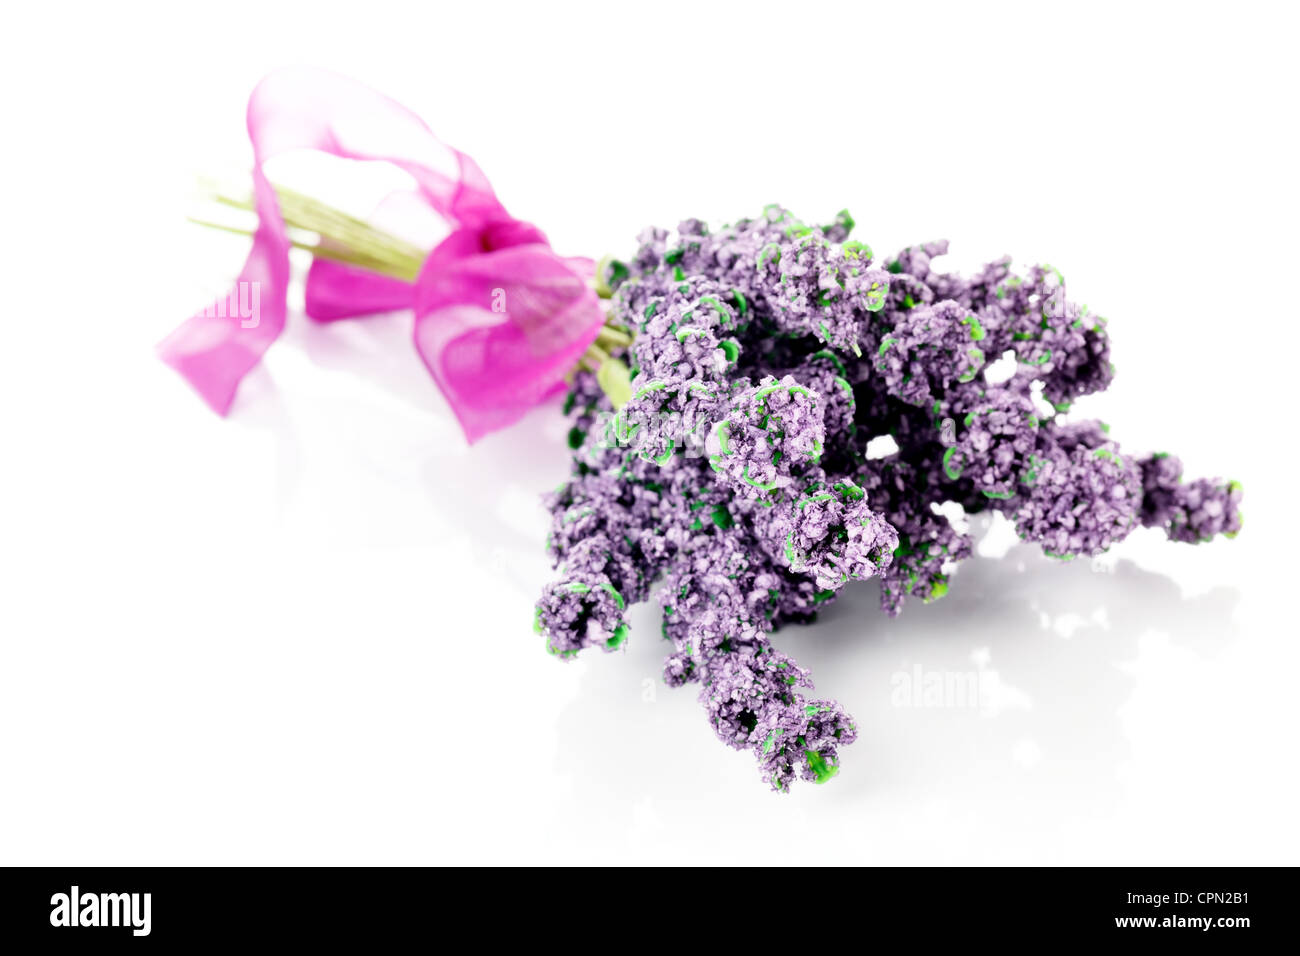 Bunch of of lavender on a white background Stock Photo